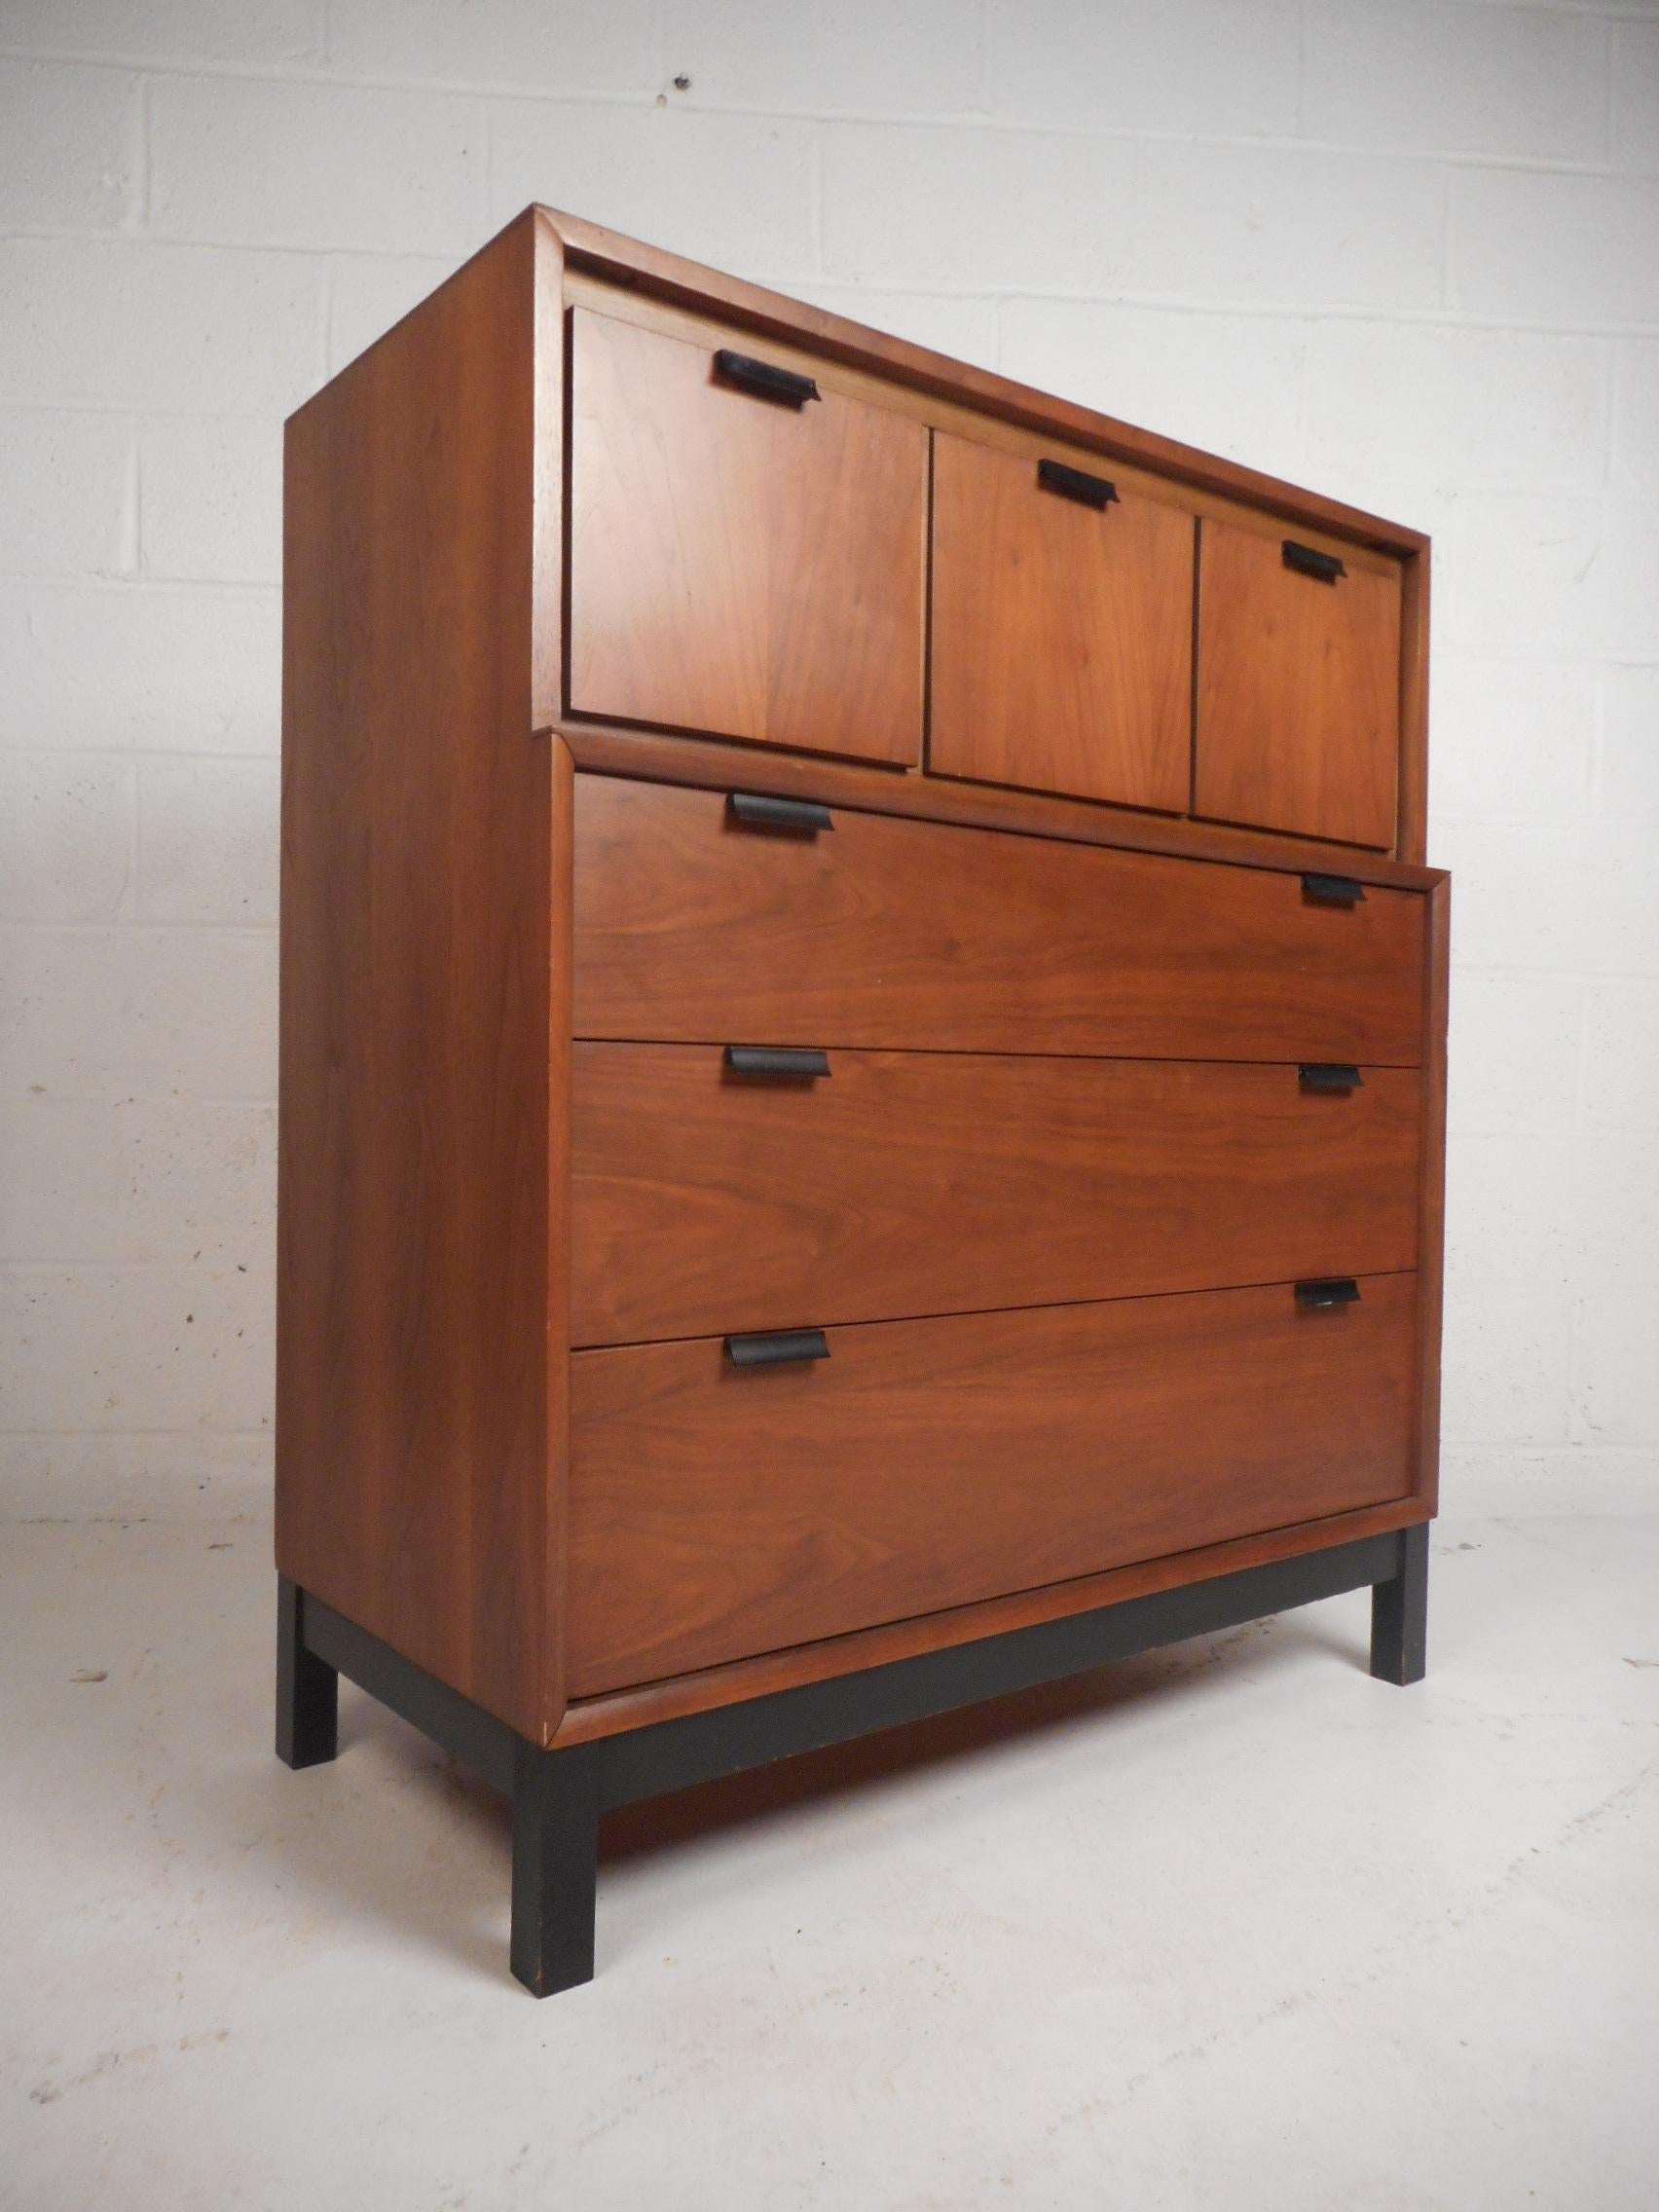 This beautiful vintage modern bedroom set includes a low dresser, a highboy dresser, and a one drawer nightstand with a compartment underneath. The highboy features three cube shaped drawers on the top and three hefty rectangular drawers underneath.